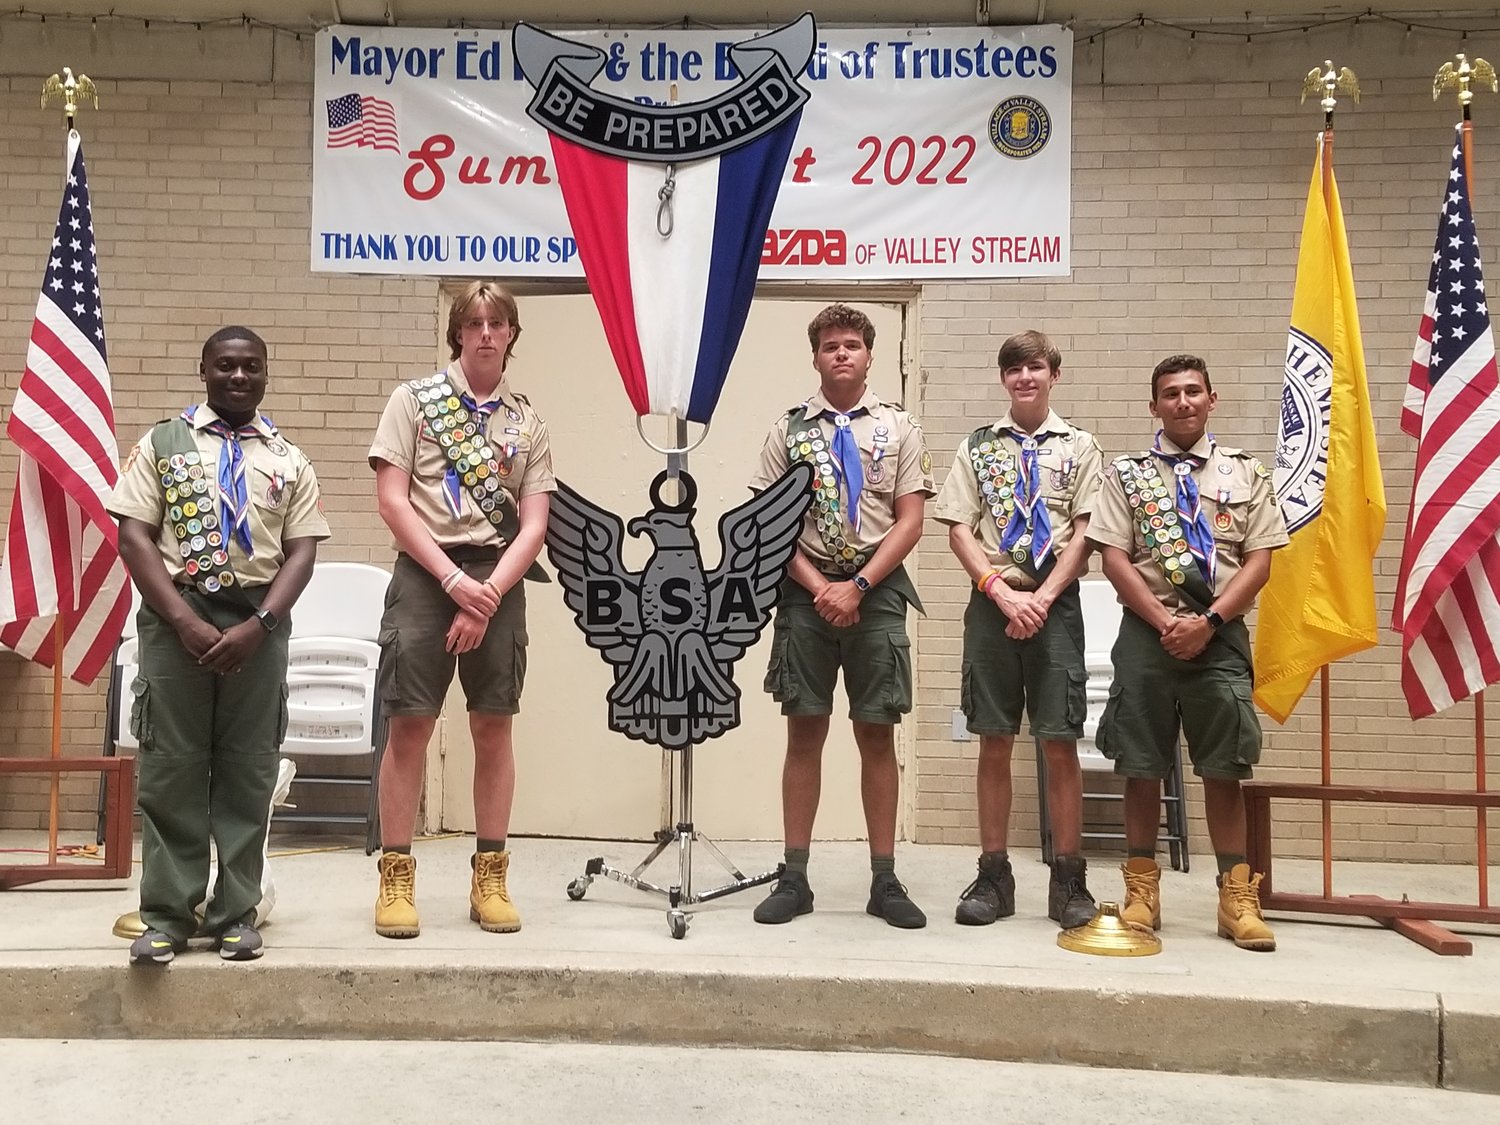 To become Eagle Scouts, Jaden Gabb, far left, Colin McAleer, Drew Mihalick, Daniel Osborn and John Valencia successfully completed a number of projects across Valley Stream and even into Queens and the Rockaways.